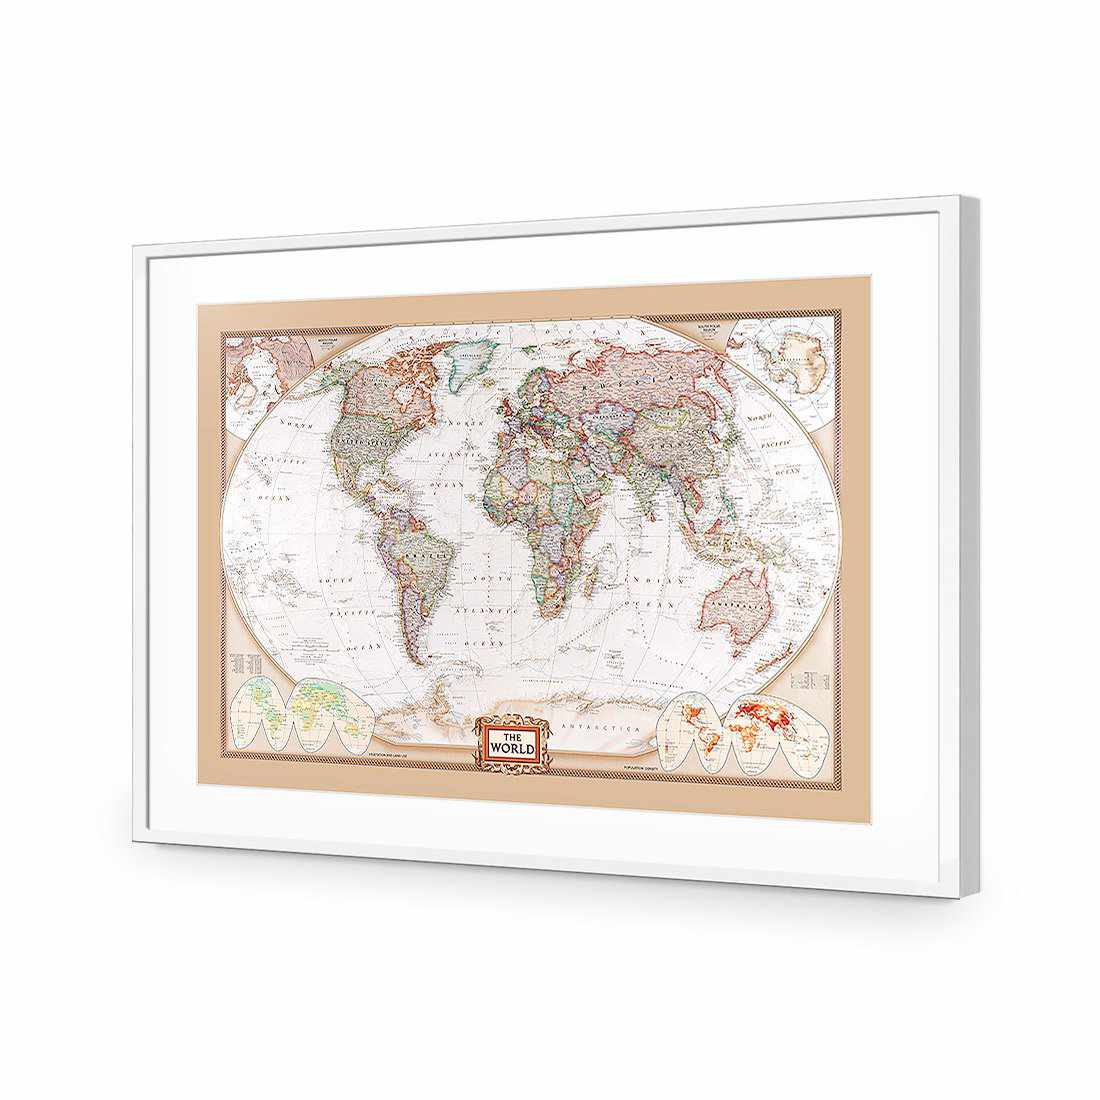 The World Map-Acrylic-Wall Art Design-With Border-Acrylic - White Frame-45x30cm-Wall Art Designs